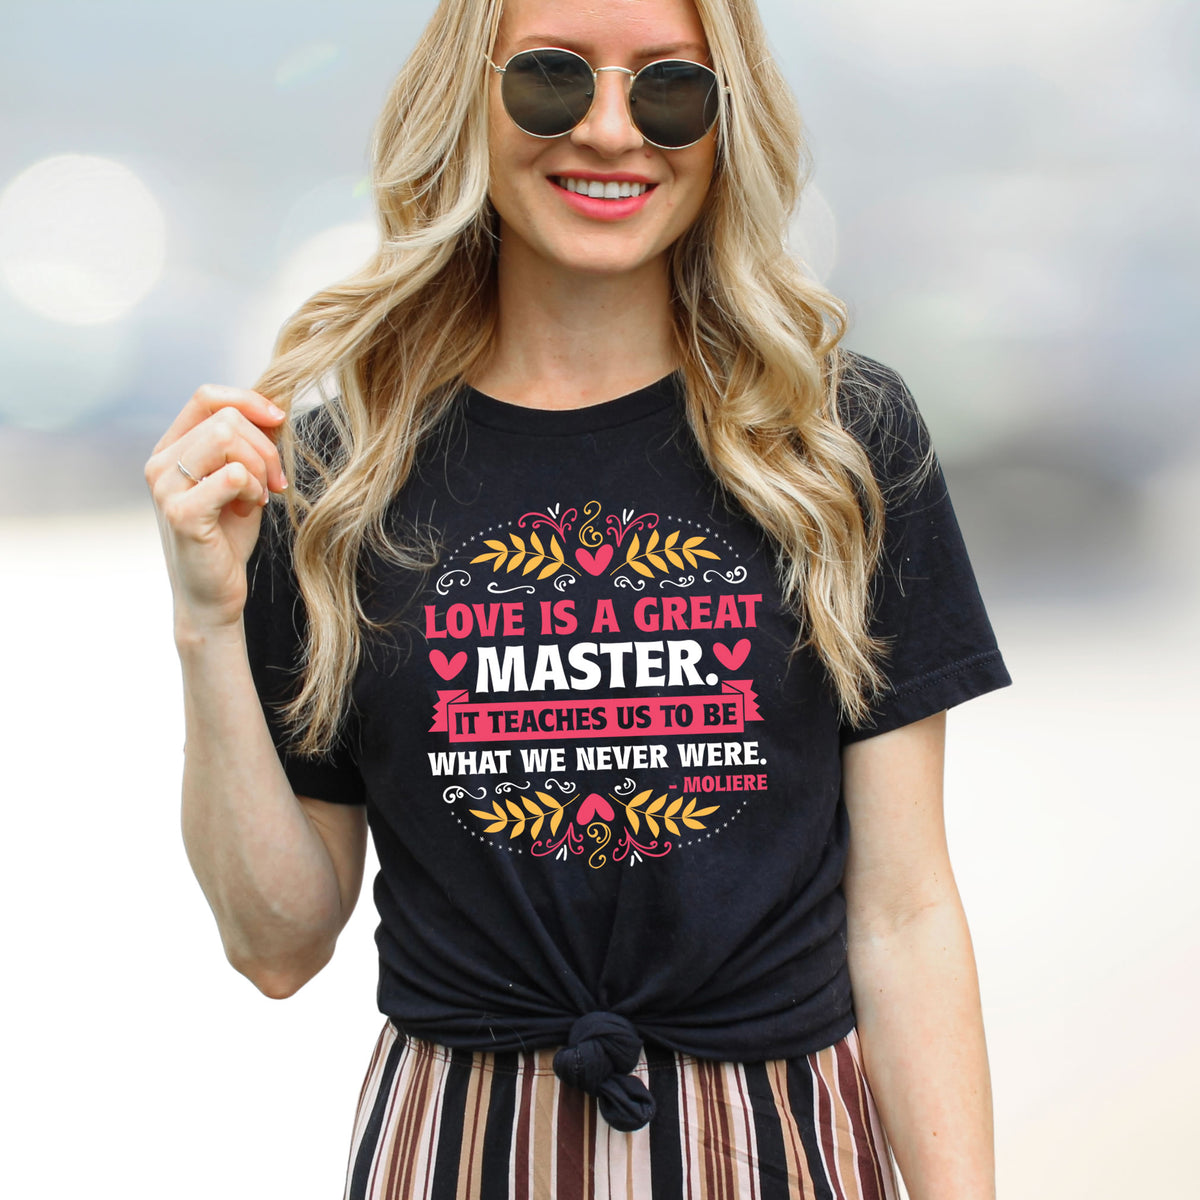 Love Is a Great Master Valentine's Day Shirt | Black Tshirt